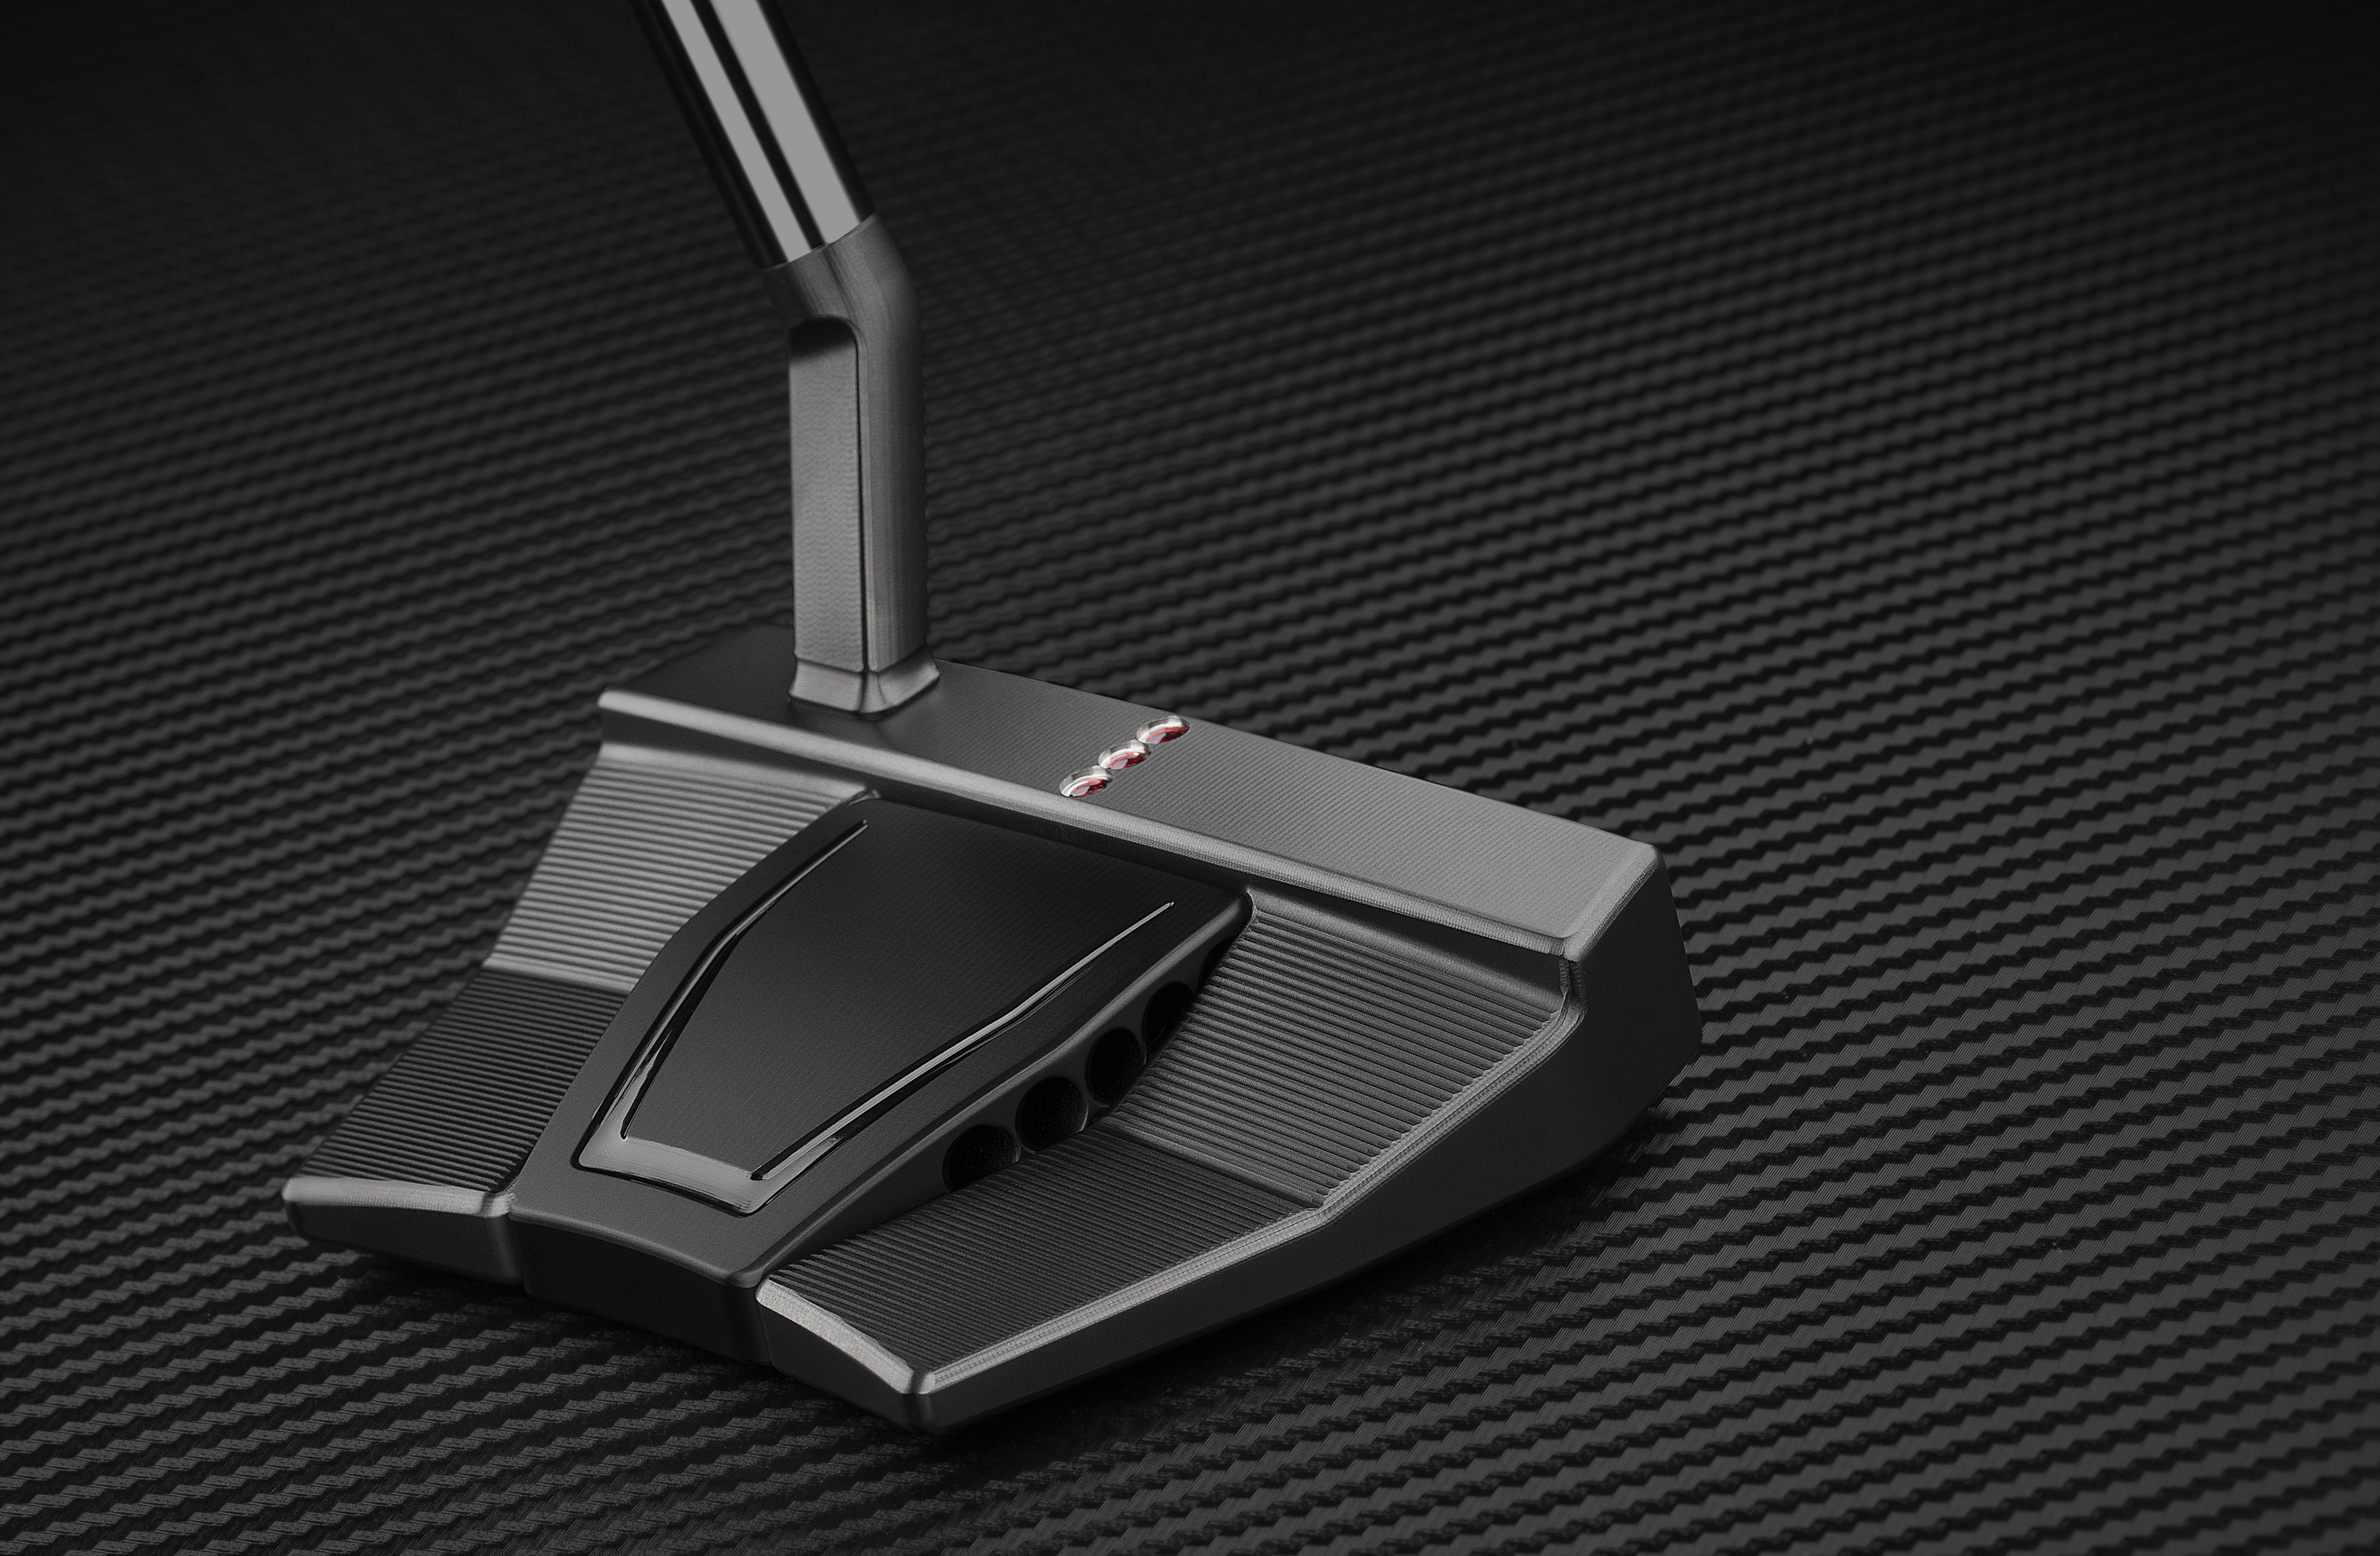 Scotty Cameron's latest limited-edition model comes in a badass